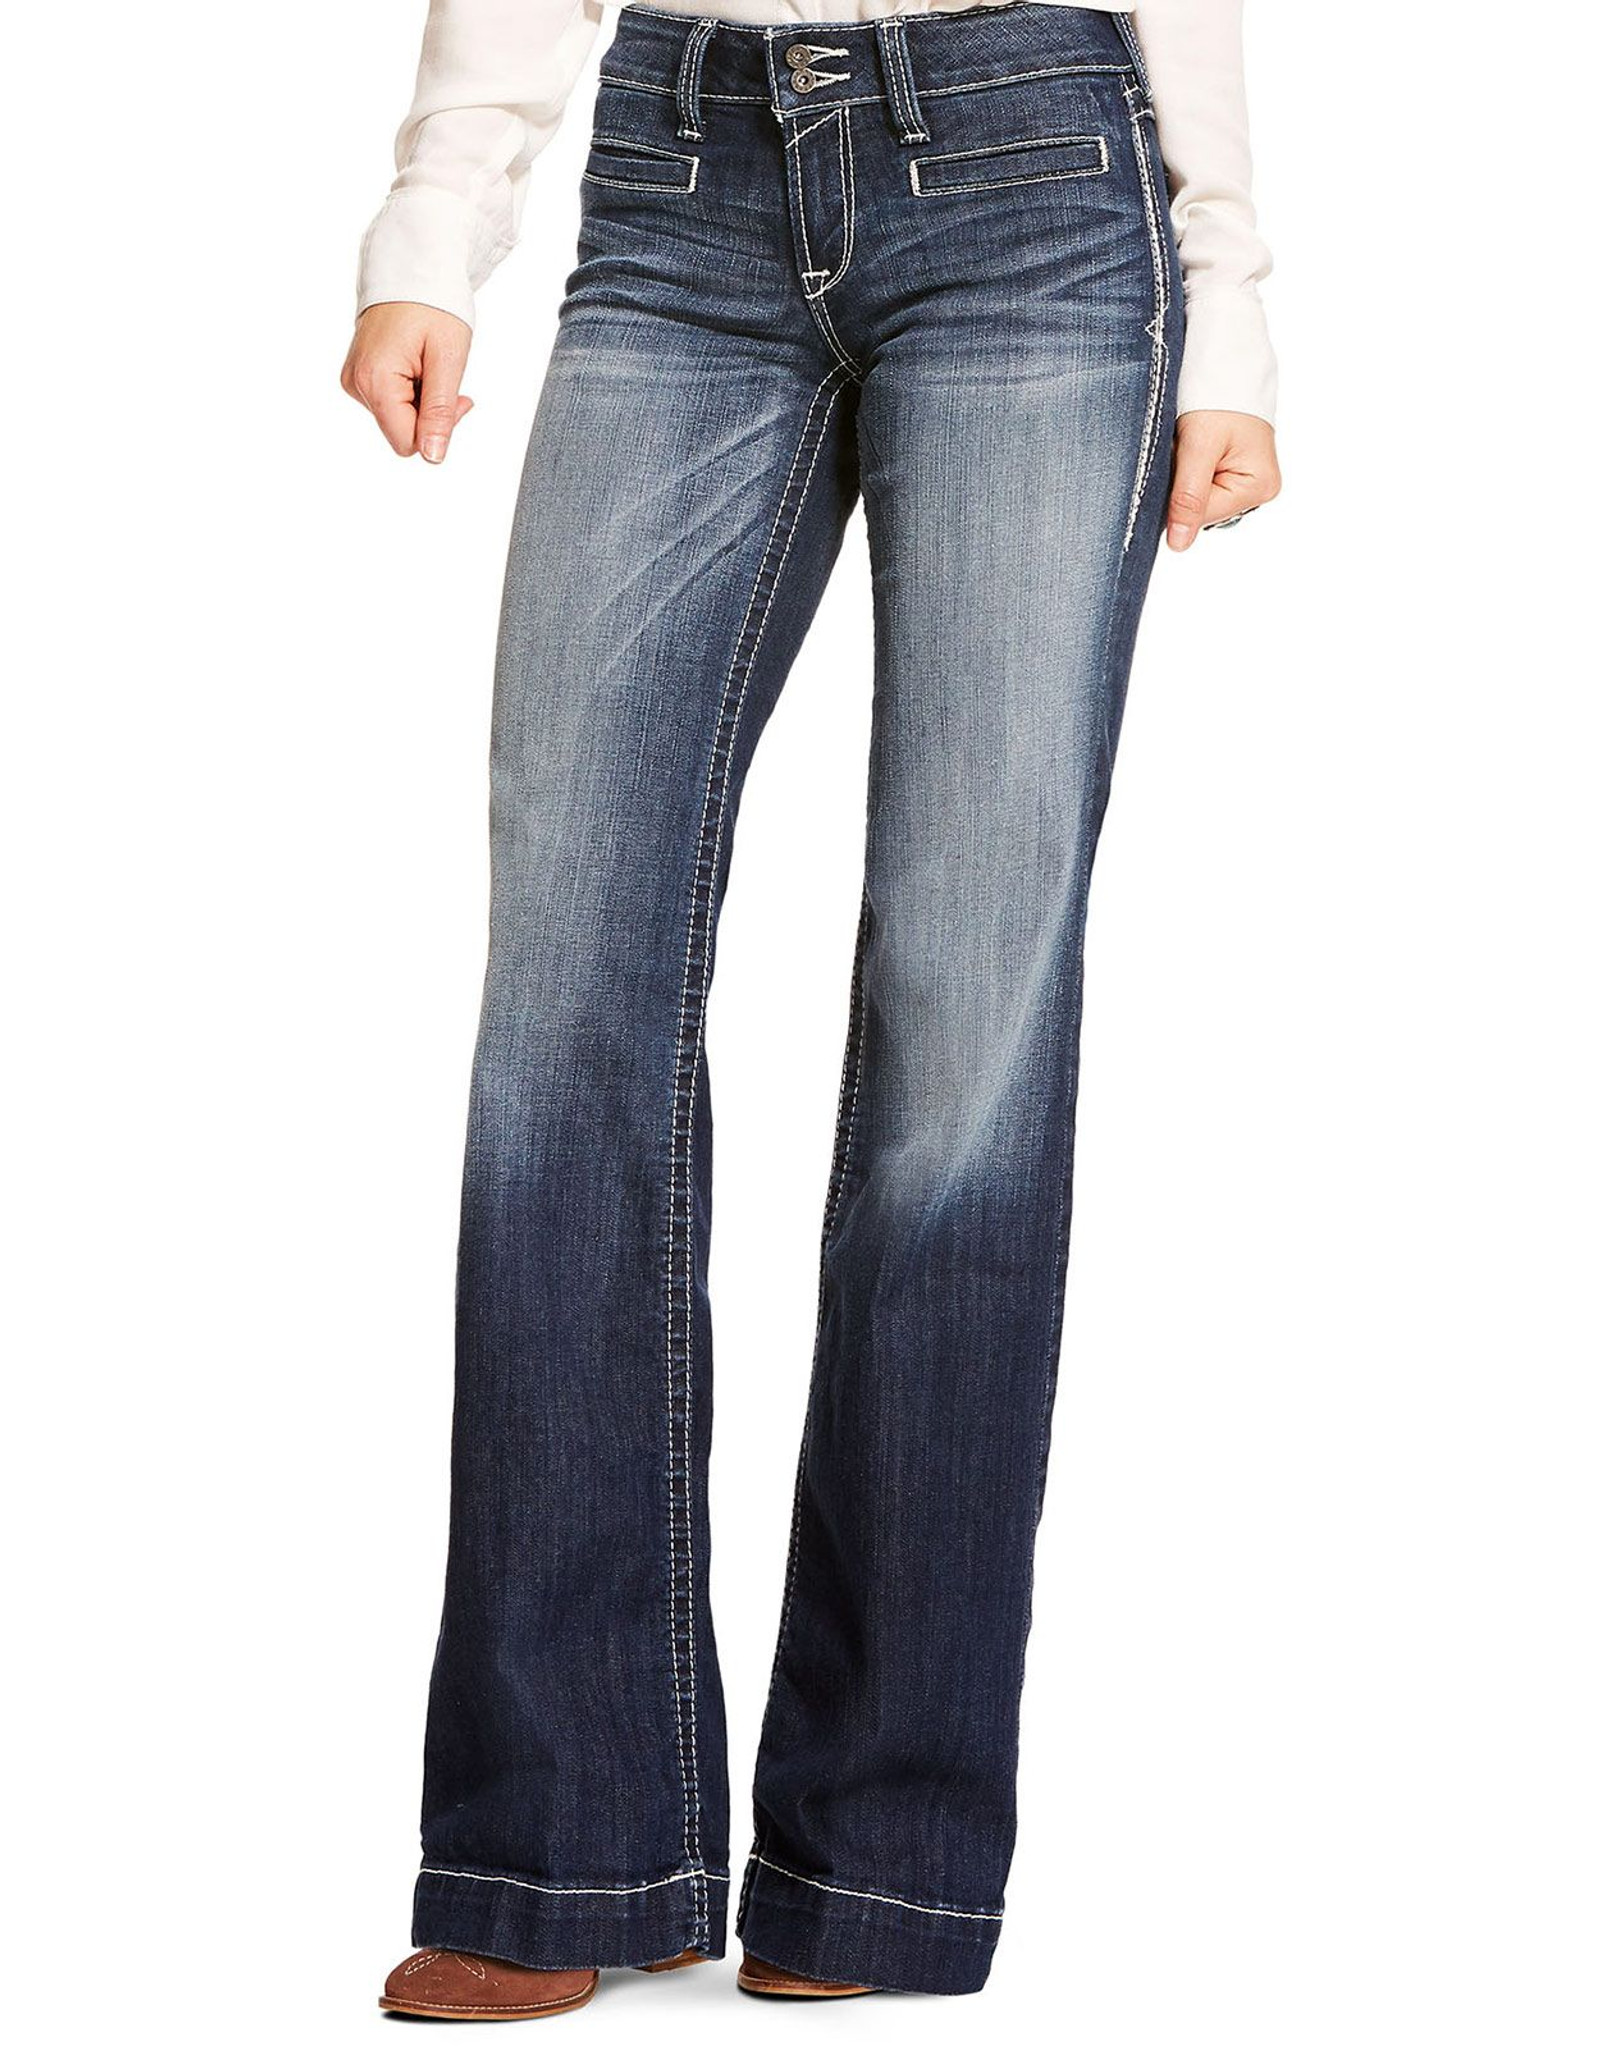 Ariat Women's Trouser Stretch Mid Rise Relaxed Fit Flare Leg Jeans - Marine